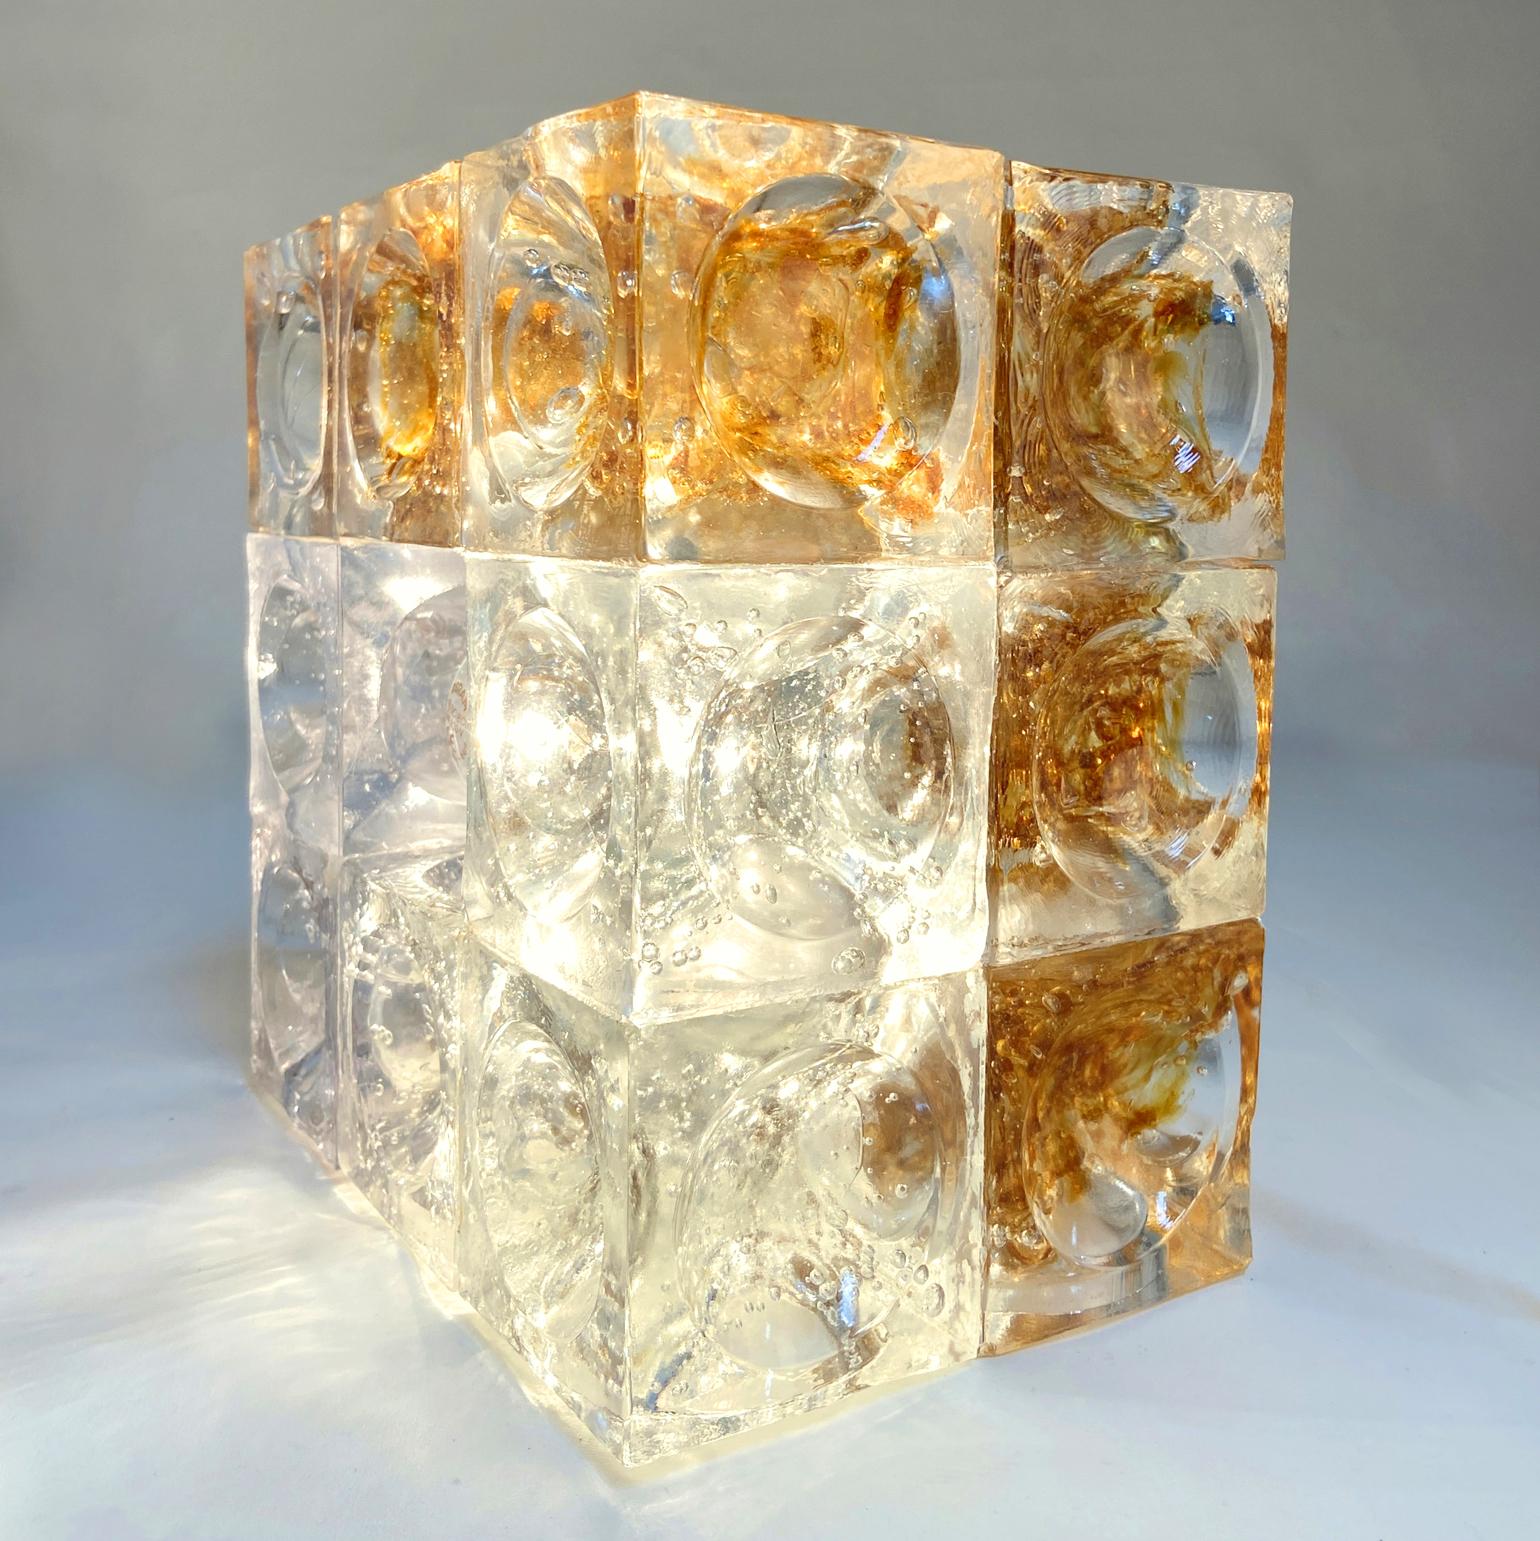 Sculptural Poliarte Table Lamp in Glass Cubes Designed by Albano Poli In Excellent Condition For Sale In London, GB